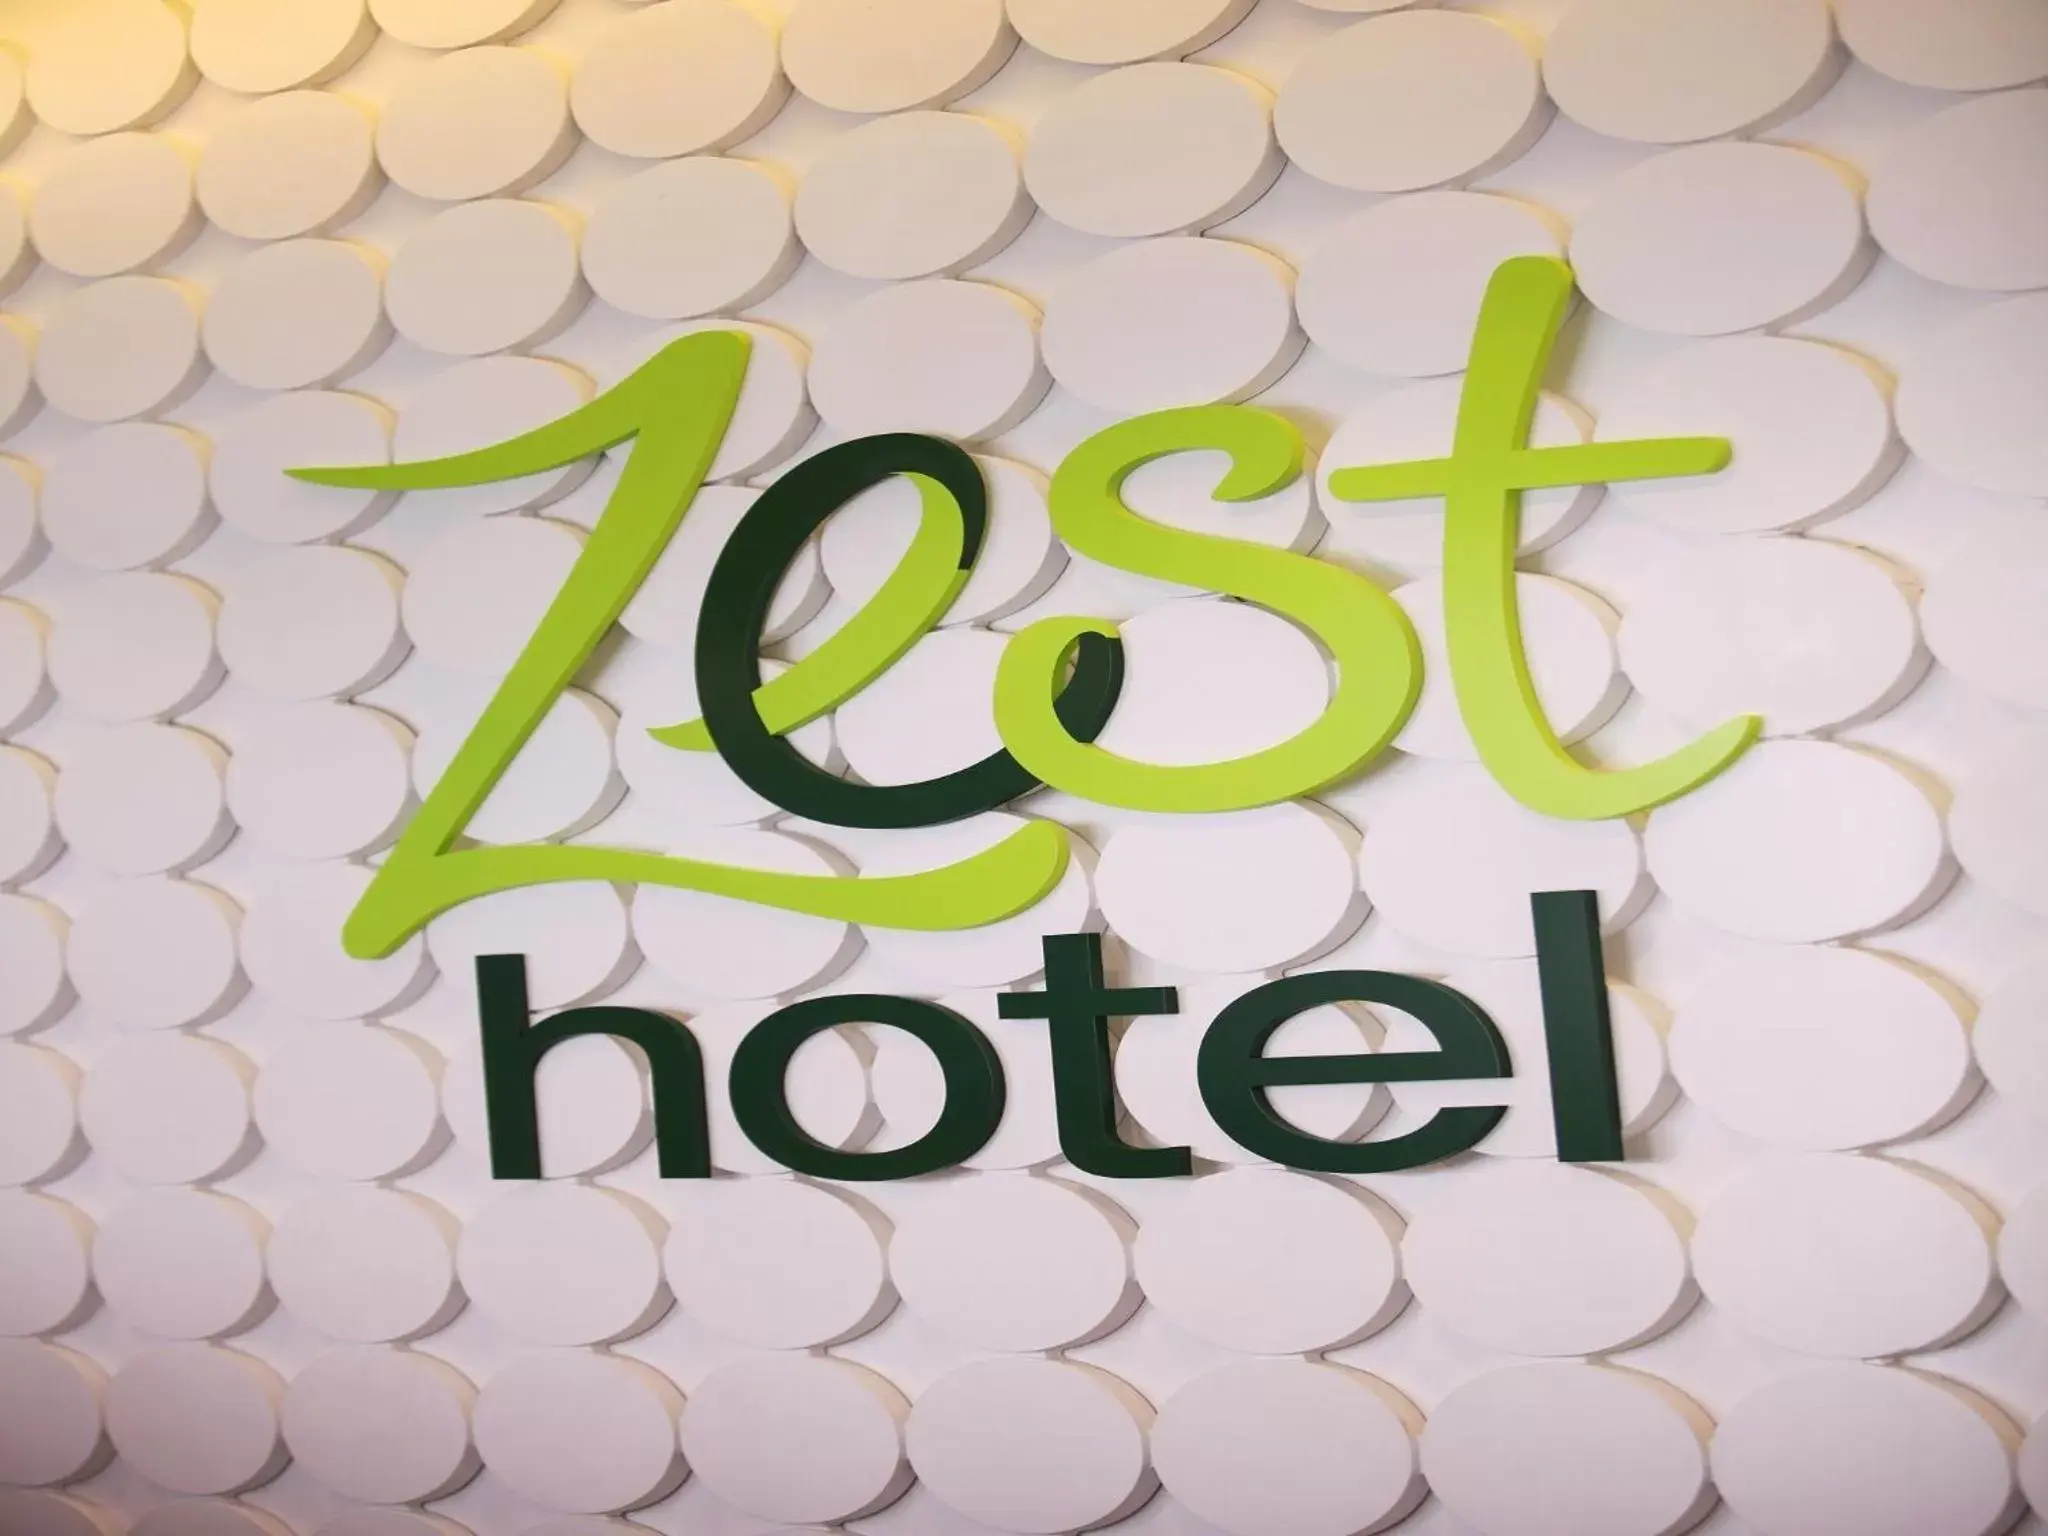 Property logo or sign in Zest Hotel Airport Jakarta